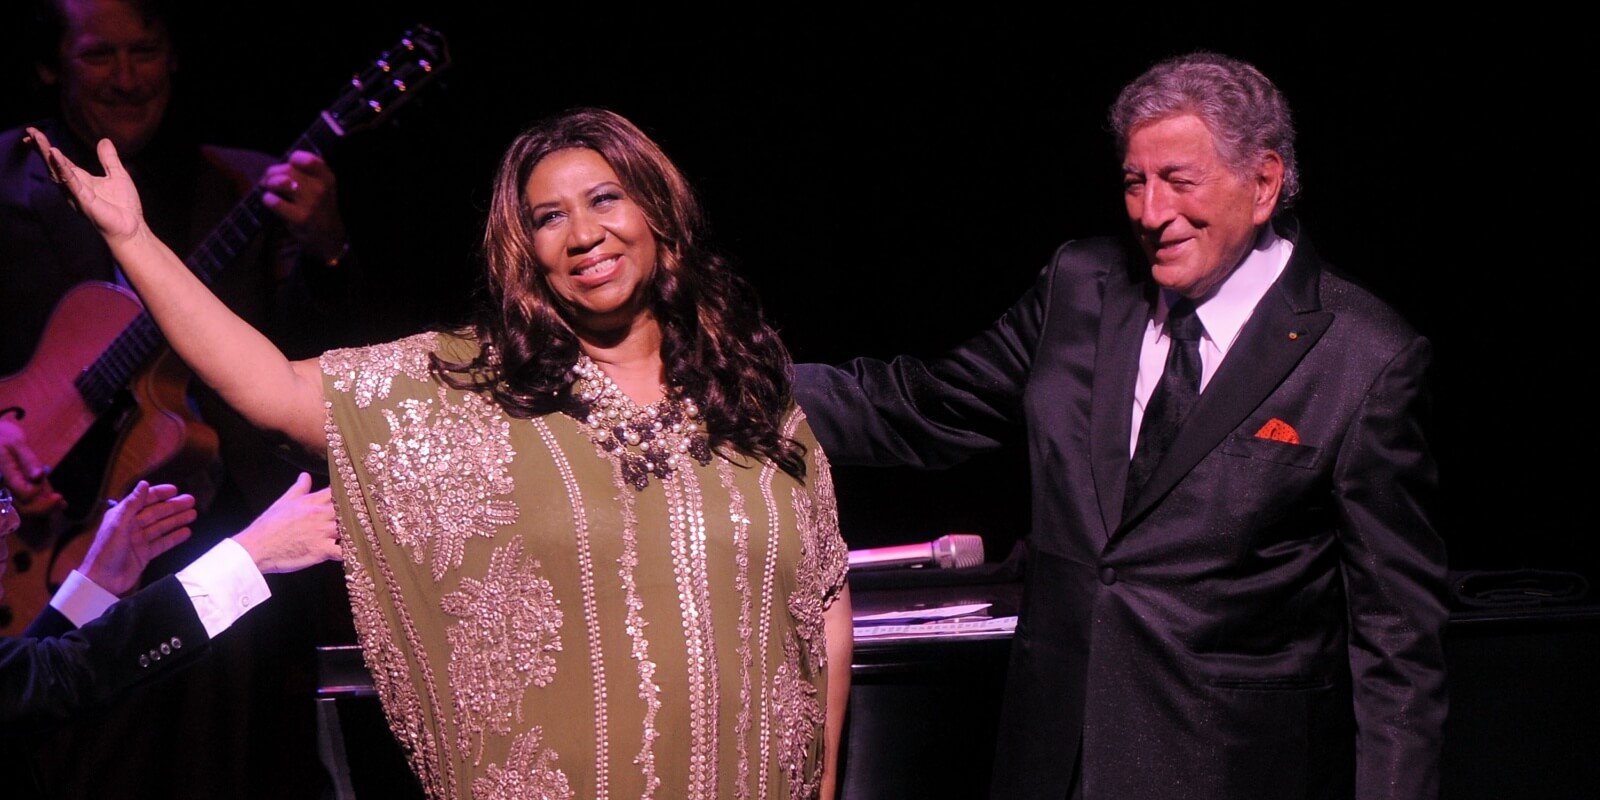 Aretha Franklin and Tony Bennett perform onstage during Tony Bennett's 85th Birthday Gala Benefit for Exploring the Arts at The Metropolitan Opera House on September 18, 2011 in New York City.